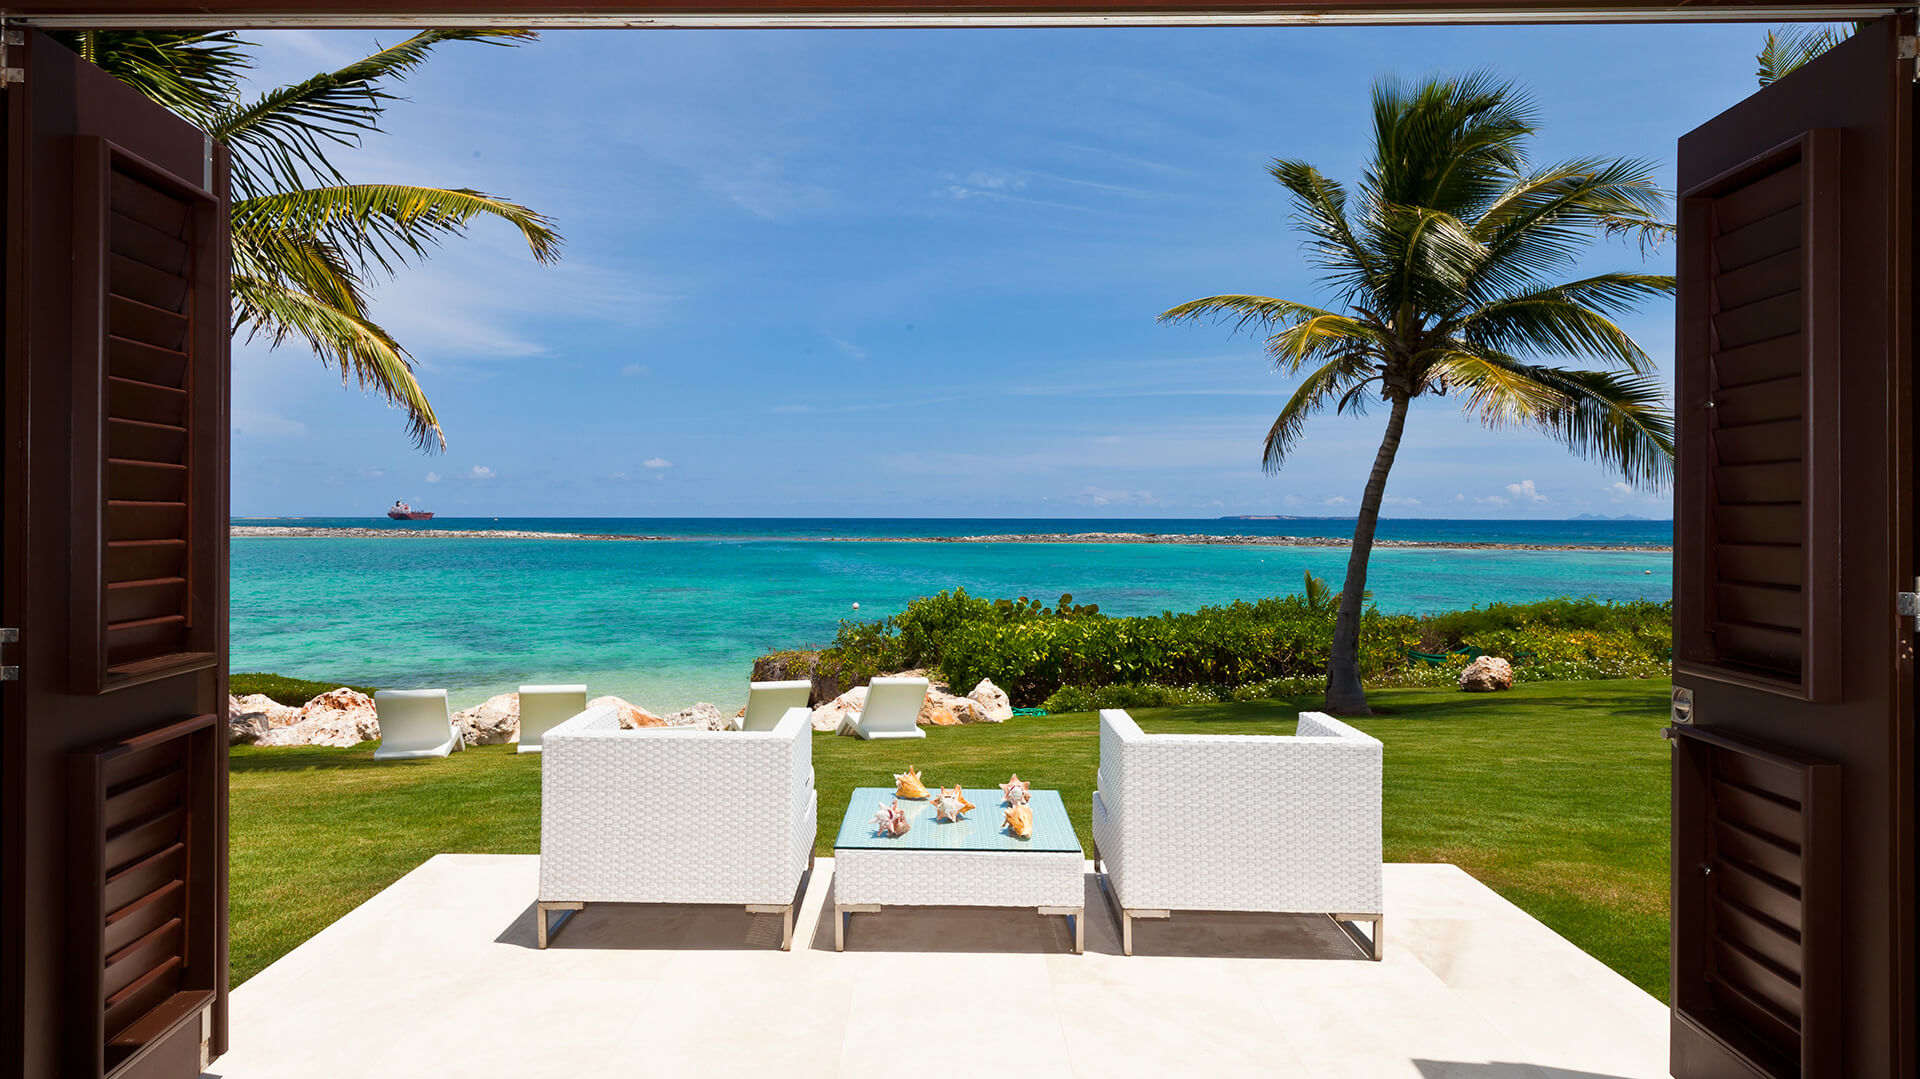 With direct access to two secluded beaches, Le Bleu Villa is the perfect rental villa for guests seeking privacy on Anguilla.
